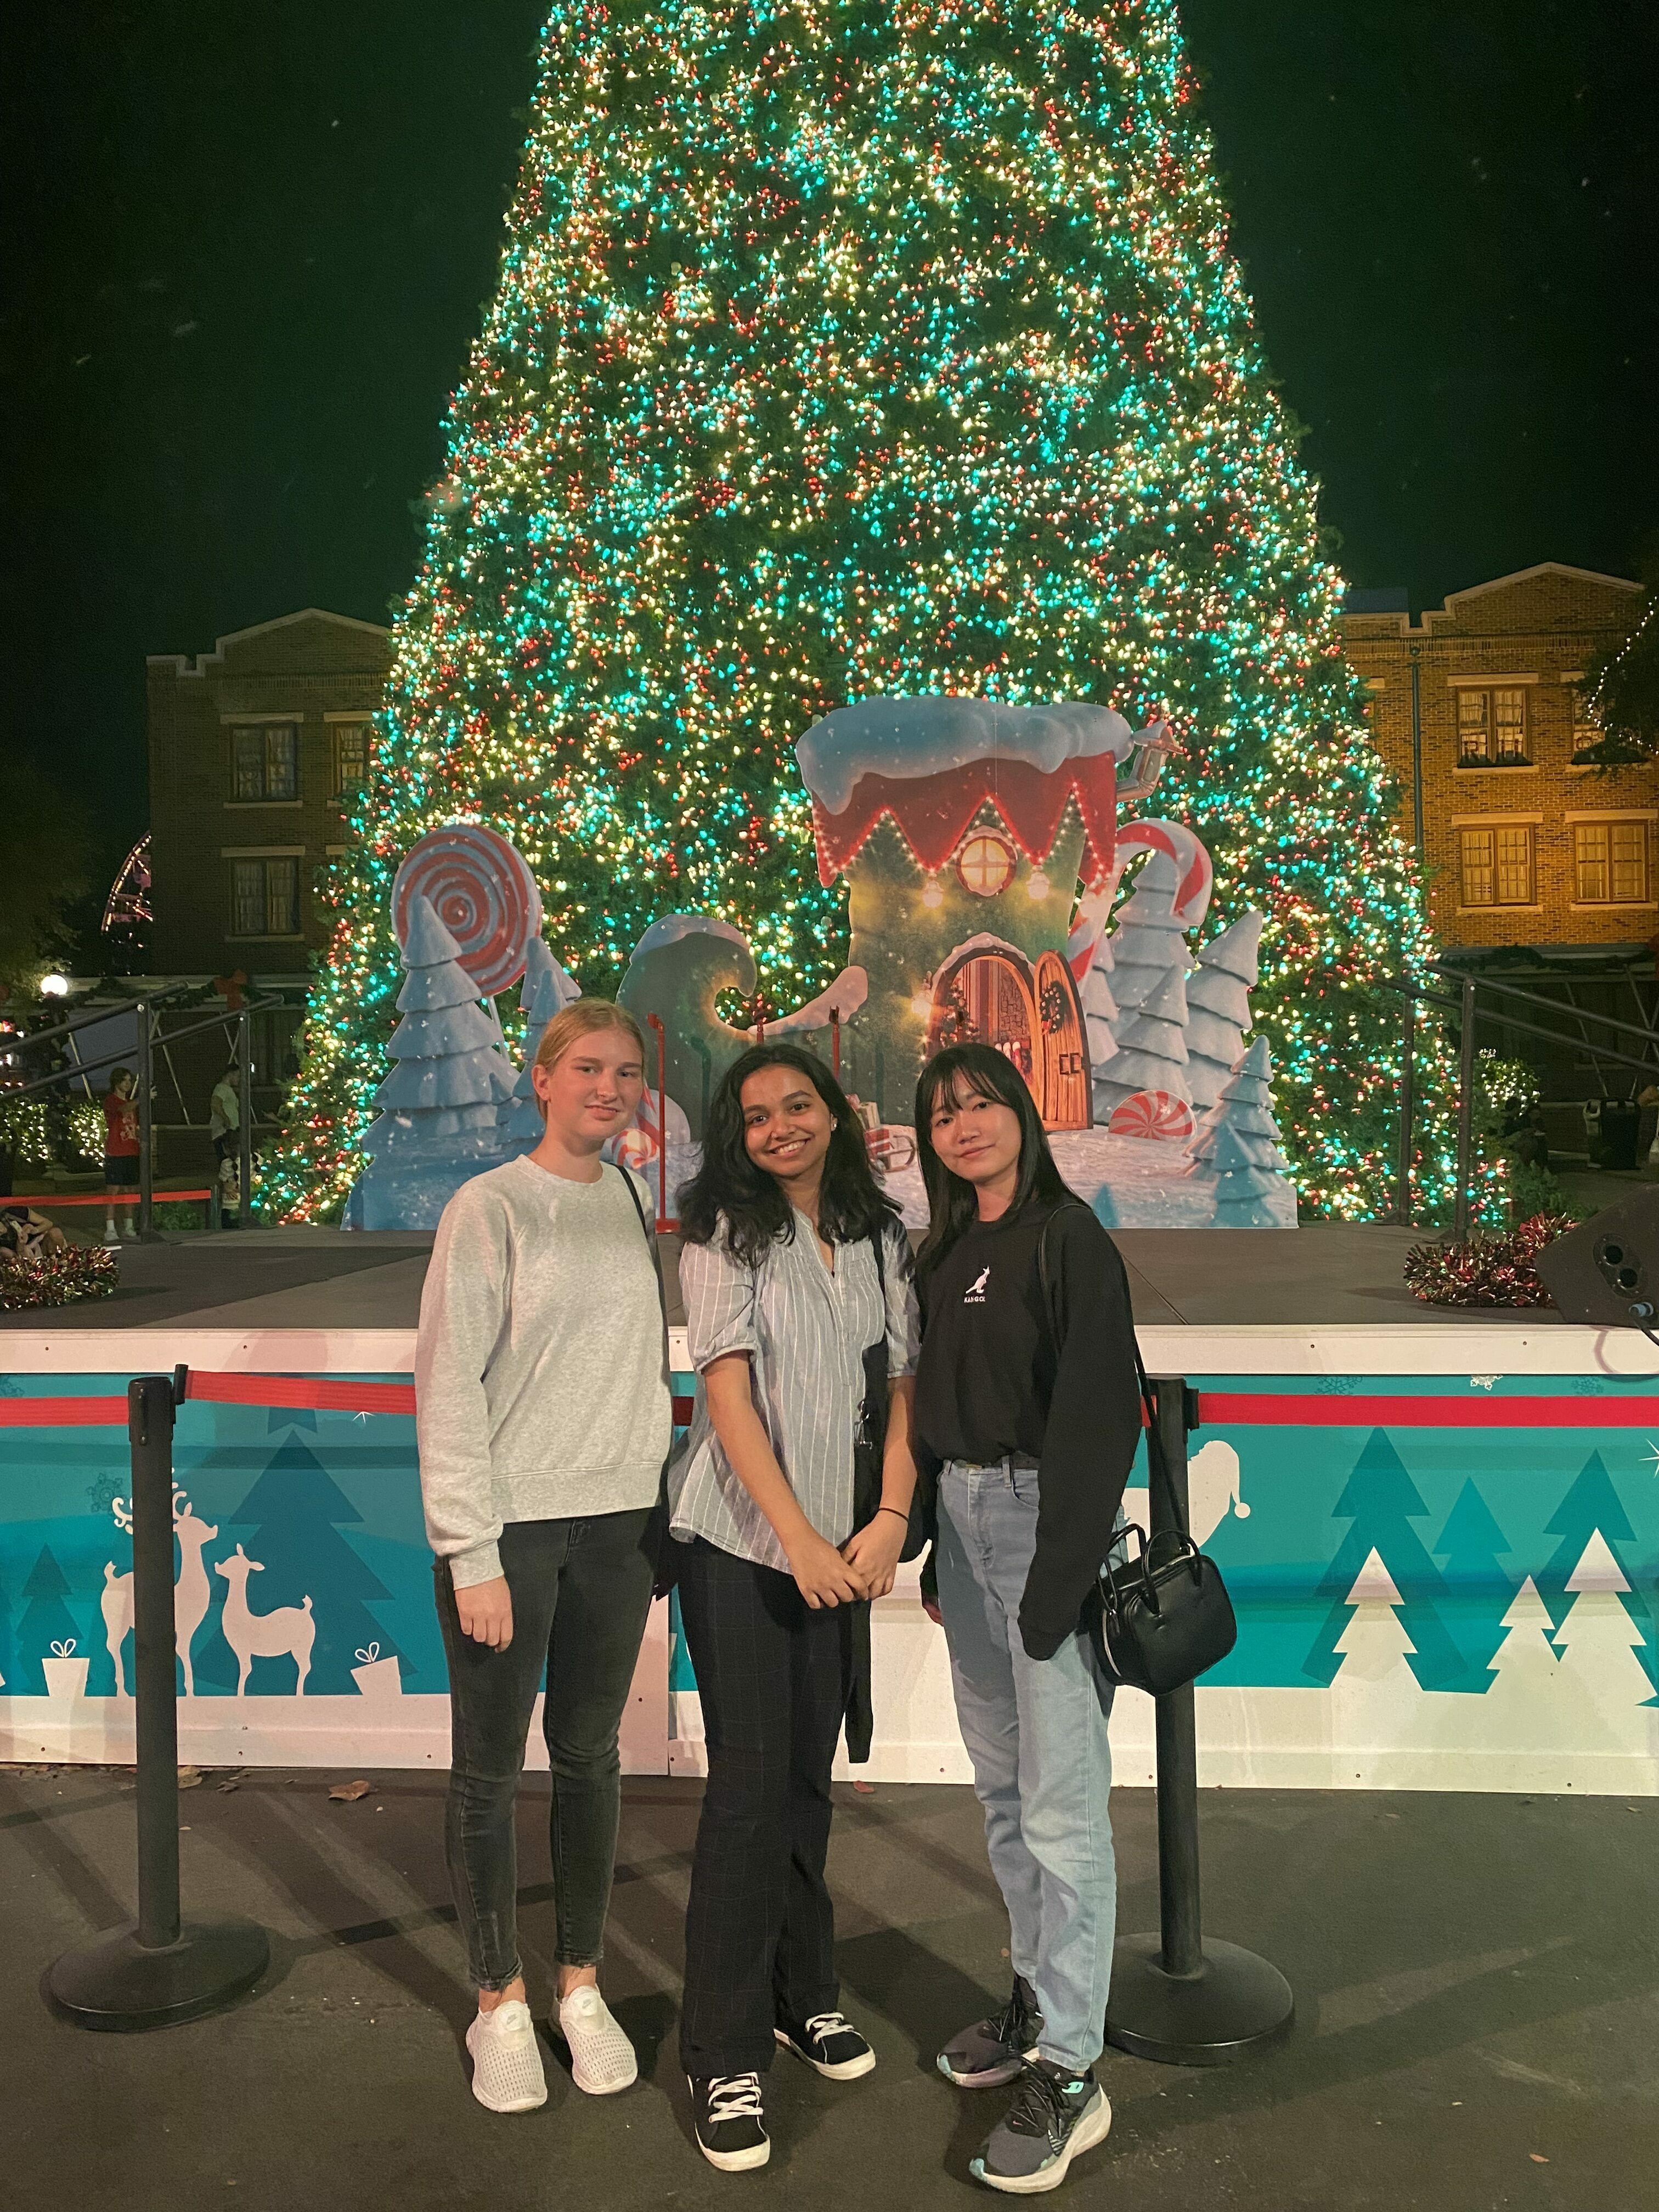 Photo Of Three Students Posing In Front Of Christmas Tree